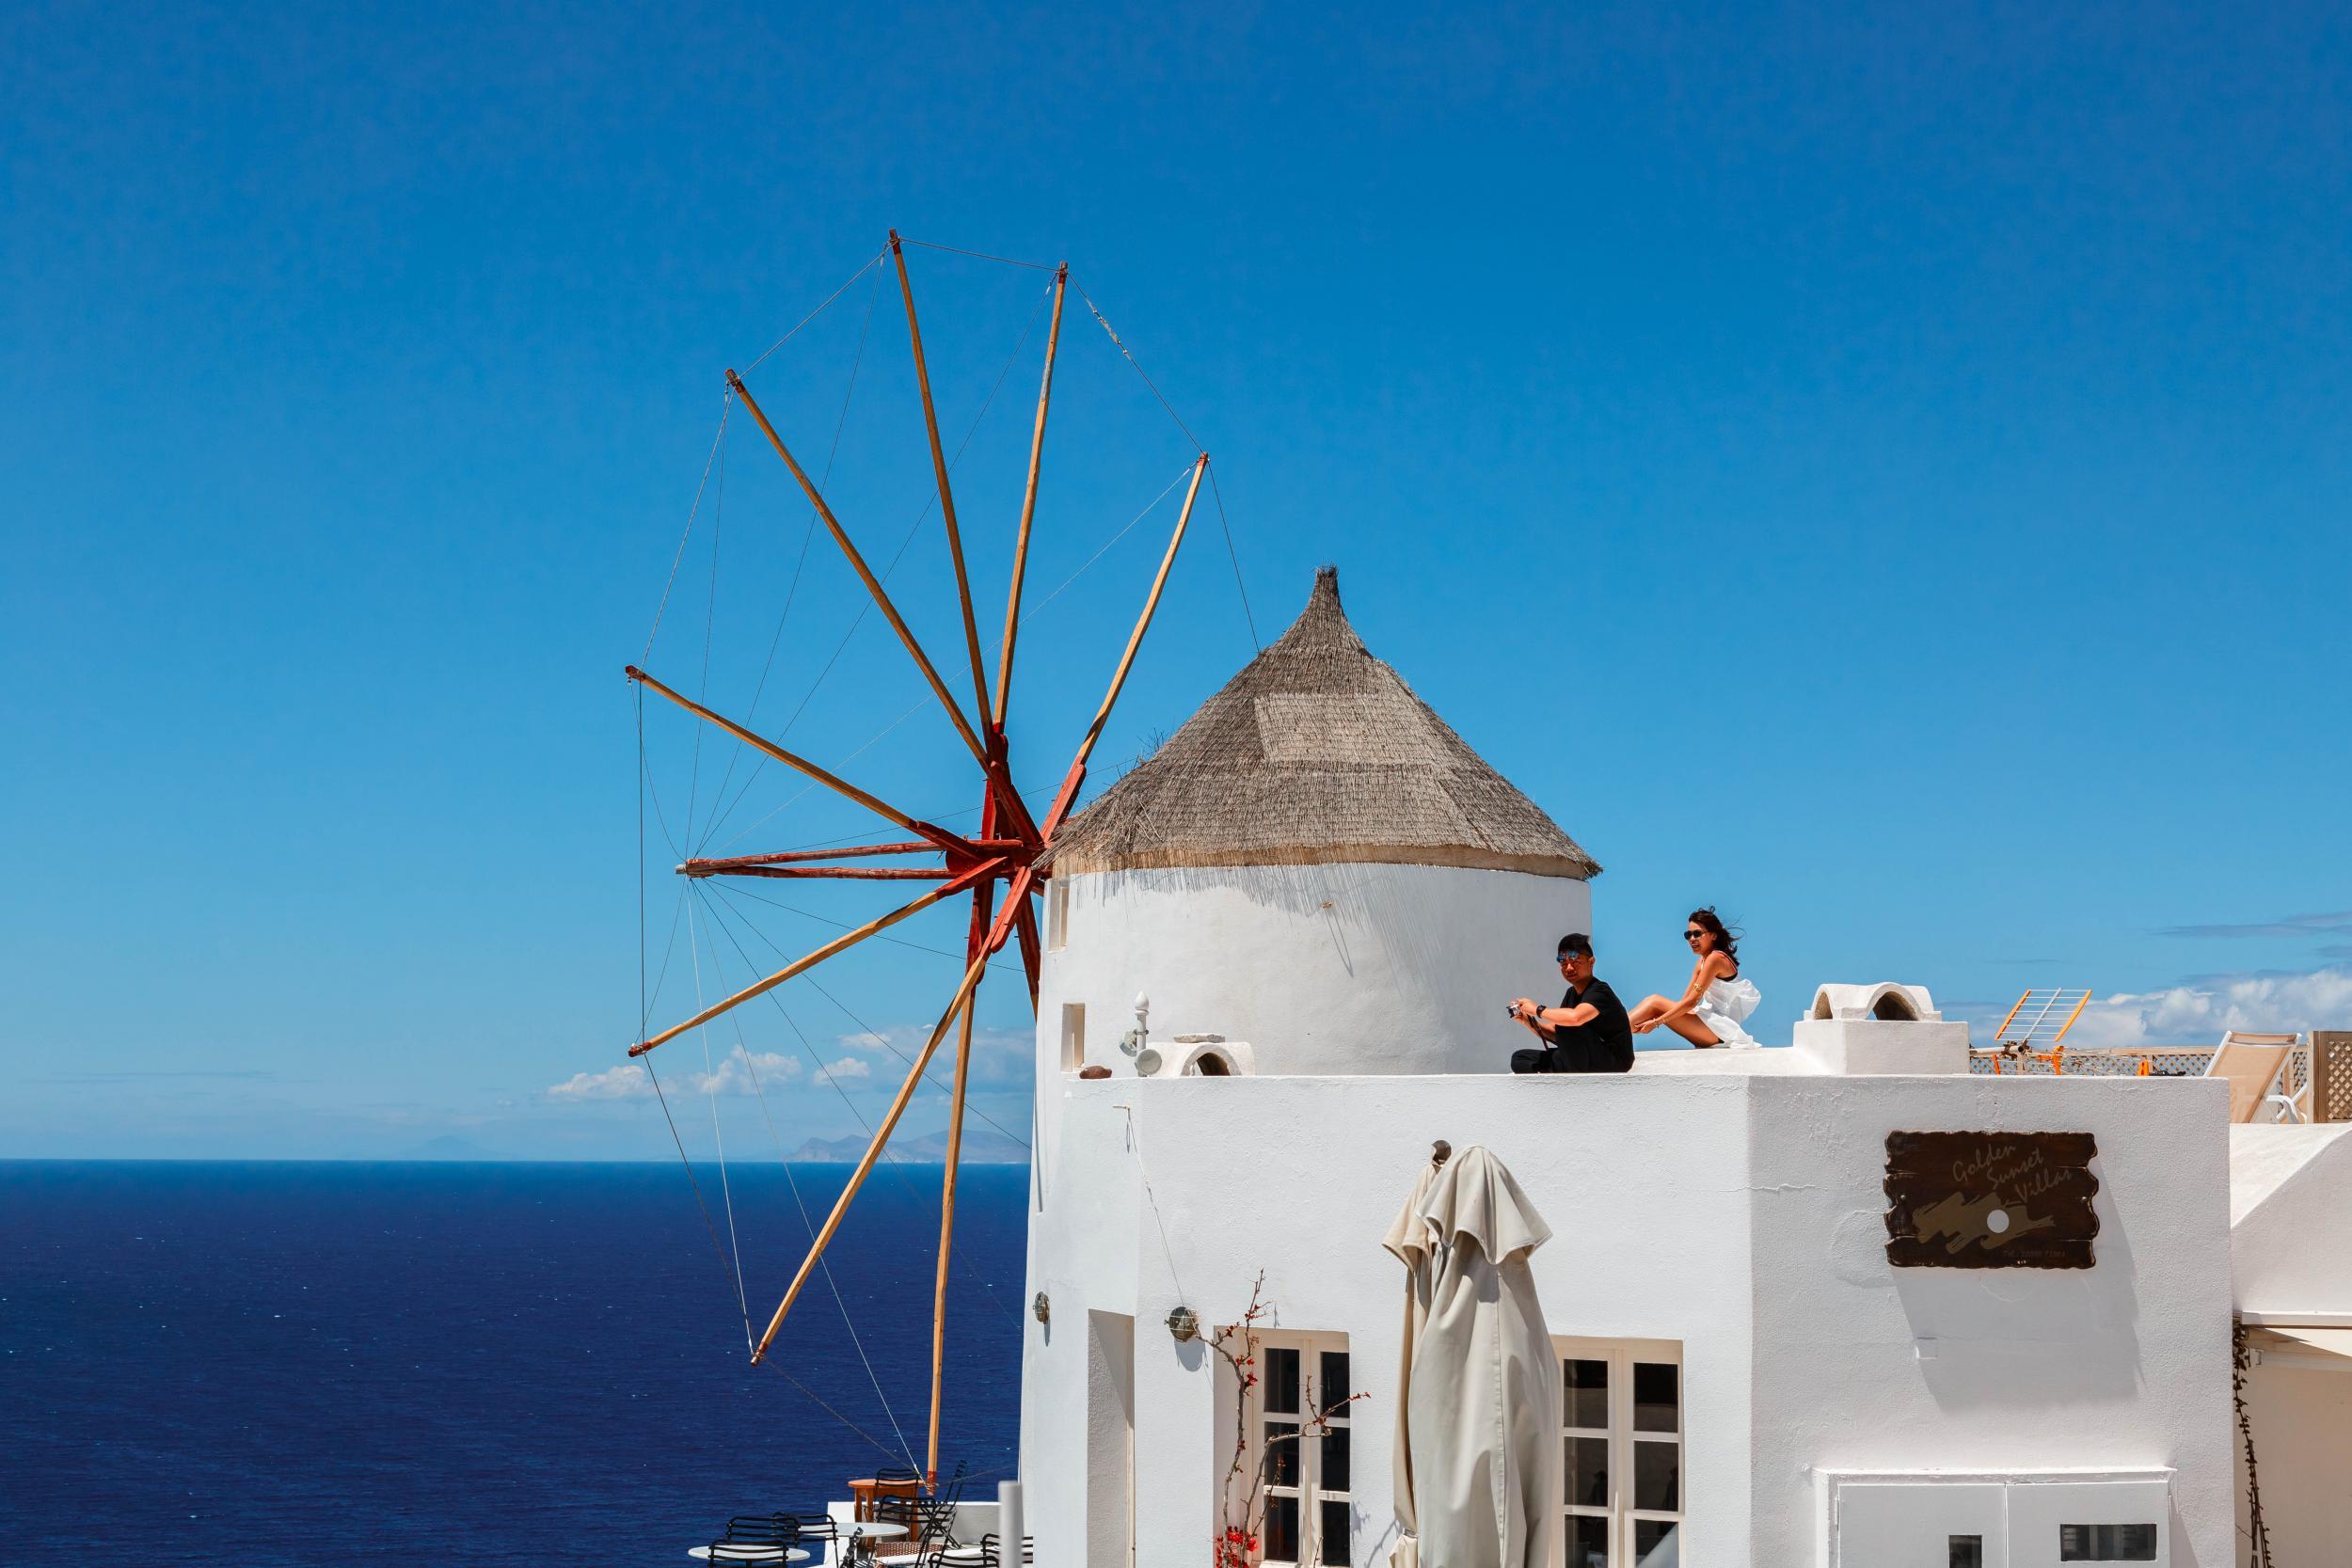 Fake holiday website Cyclades Rentals claimed to offer villas in Santorini